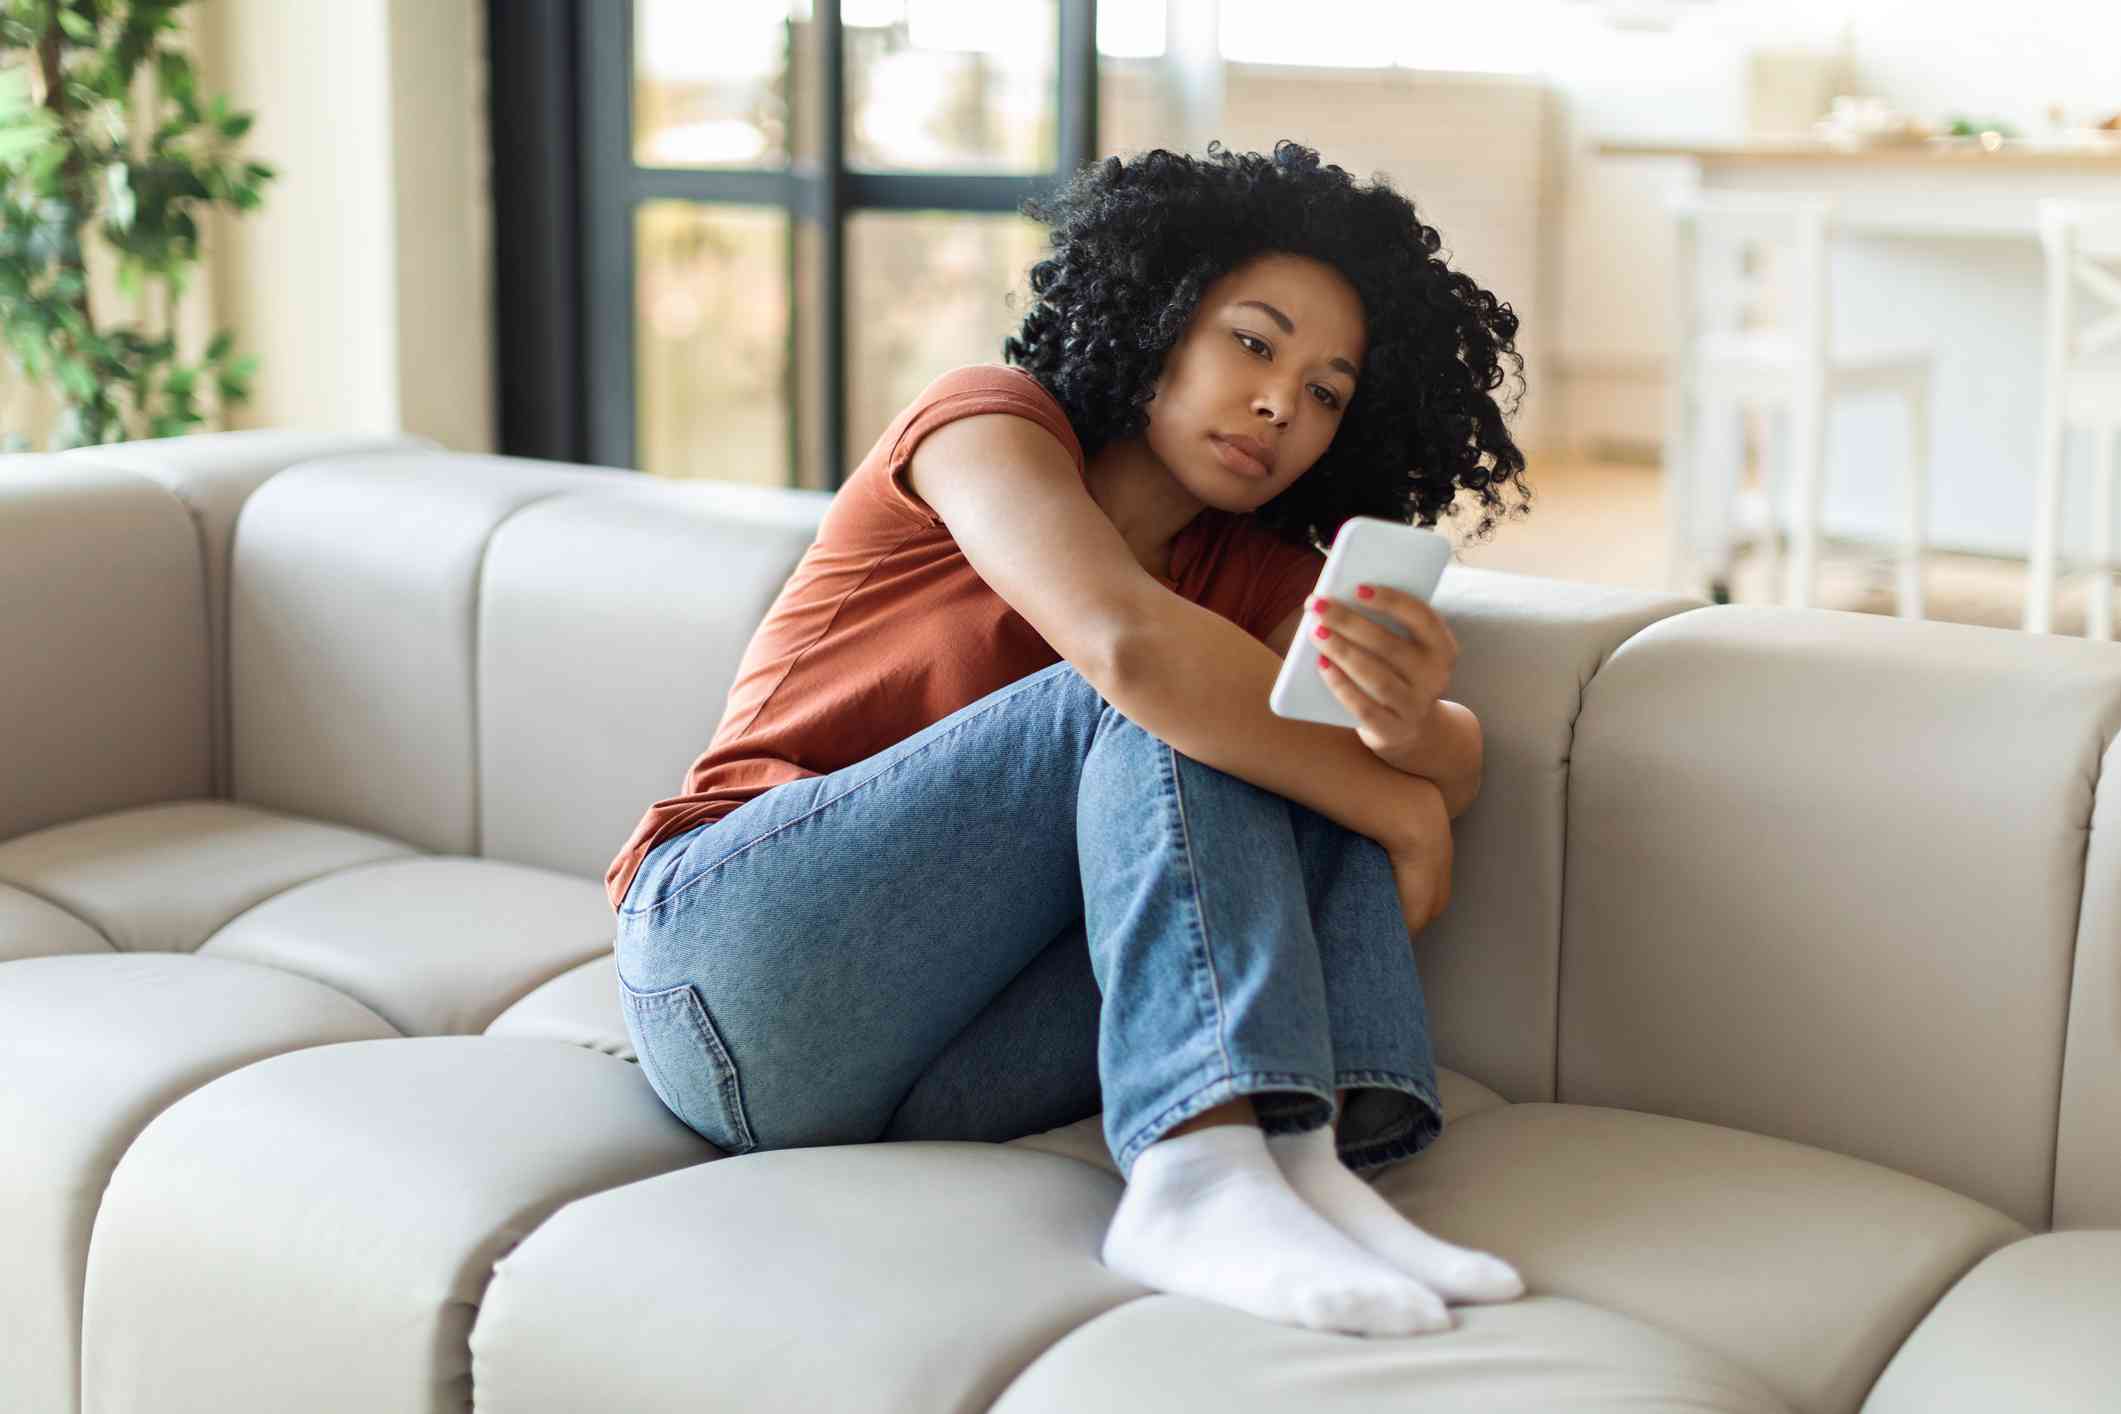 A woman in an orange shirt sits curled up on the couch while looking at her phone in her hand with a sad expression.